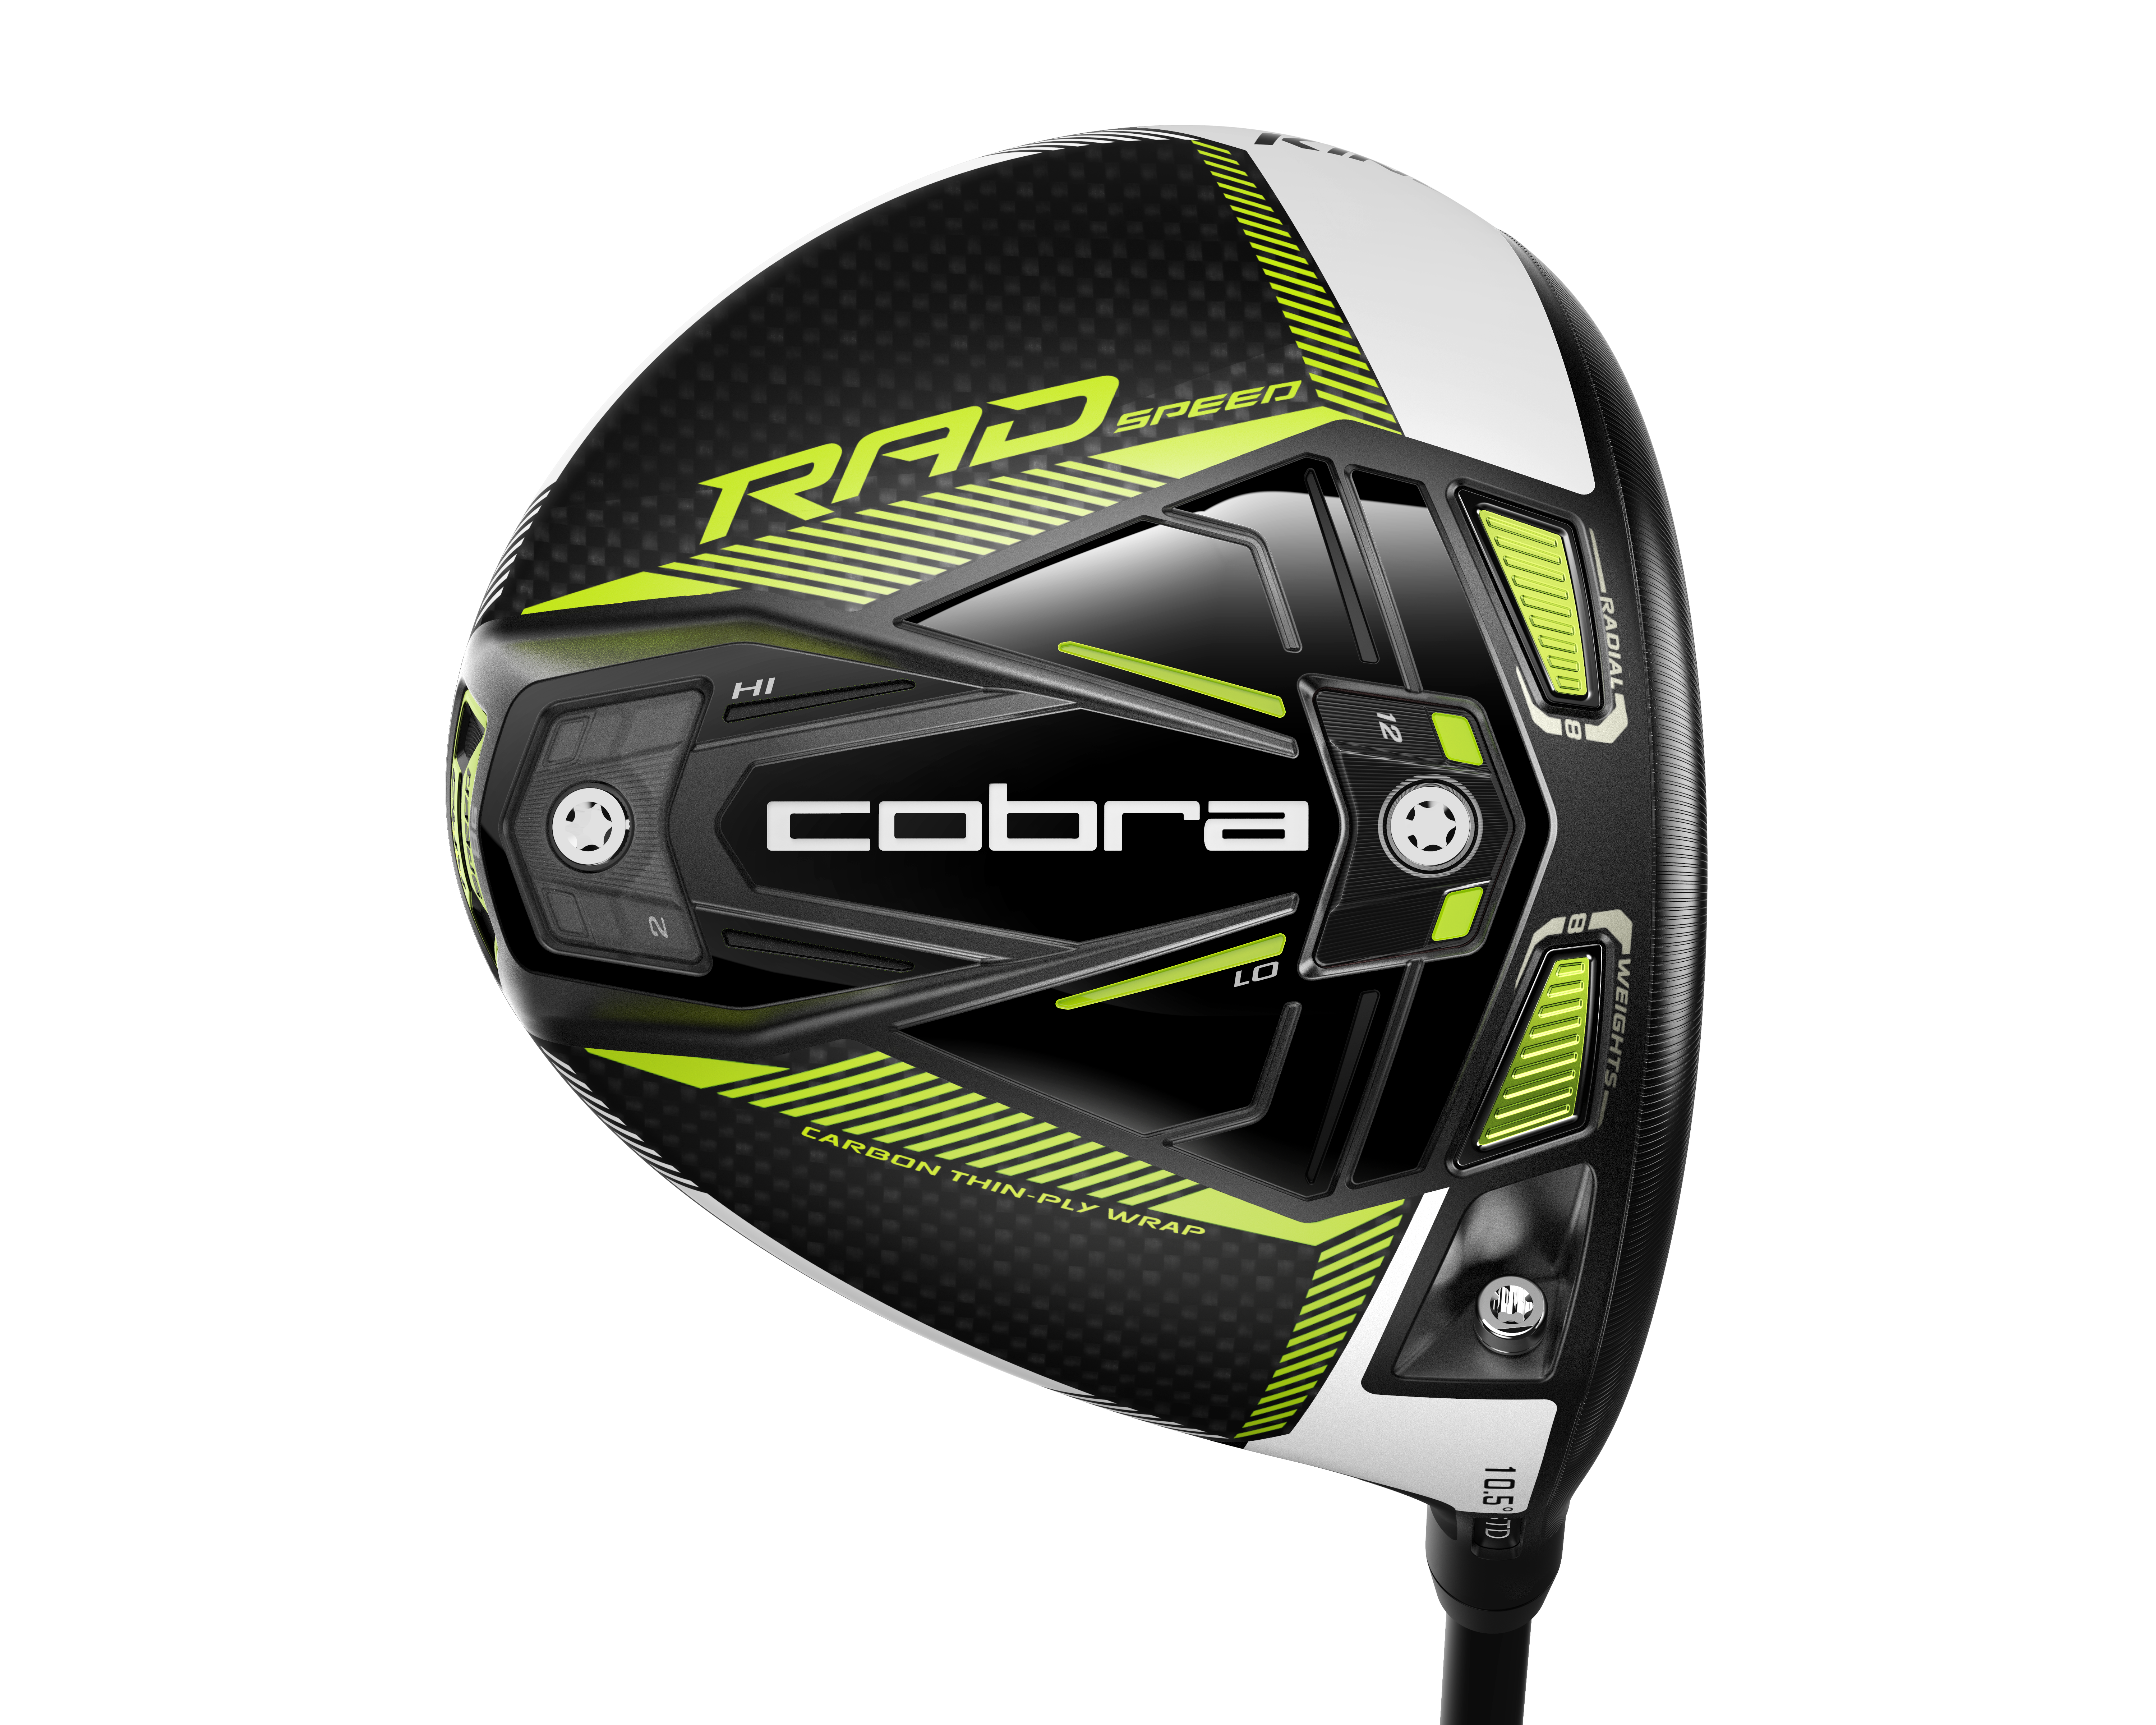 Cobra Radspeed metalwoods go to extremes for three different player types, Golf Equipment: Clubs, Balls, Bags